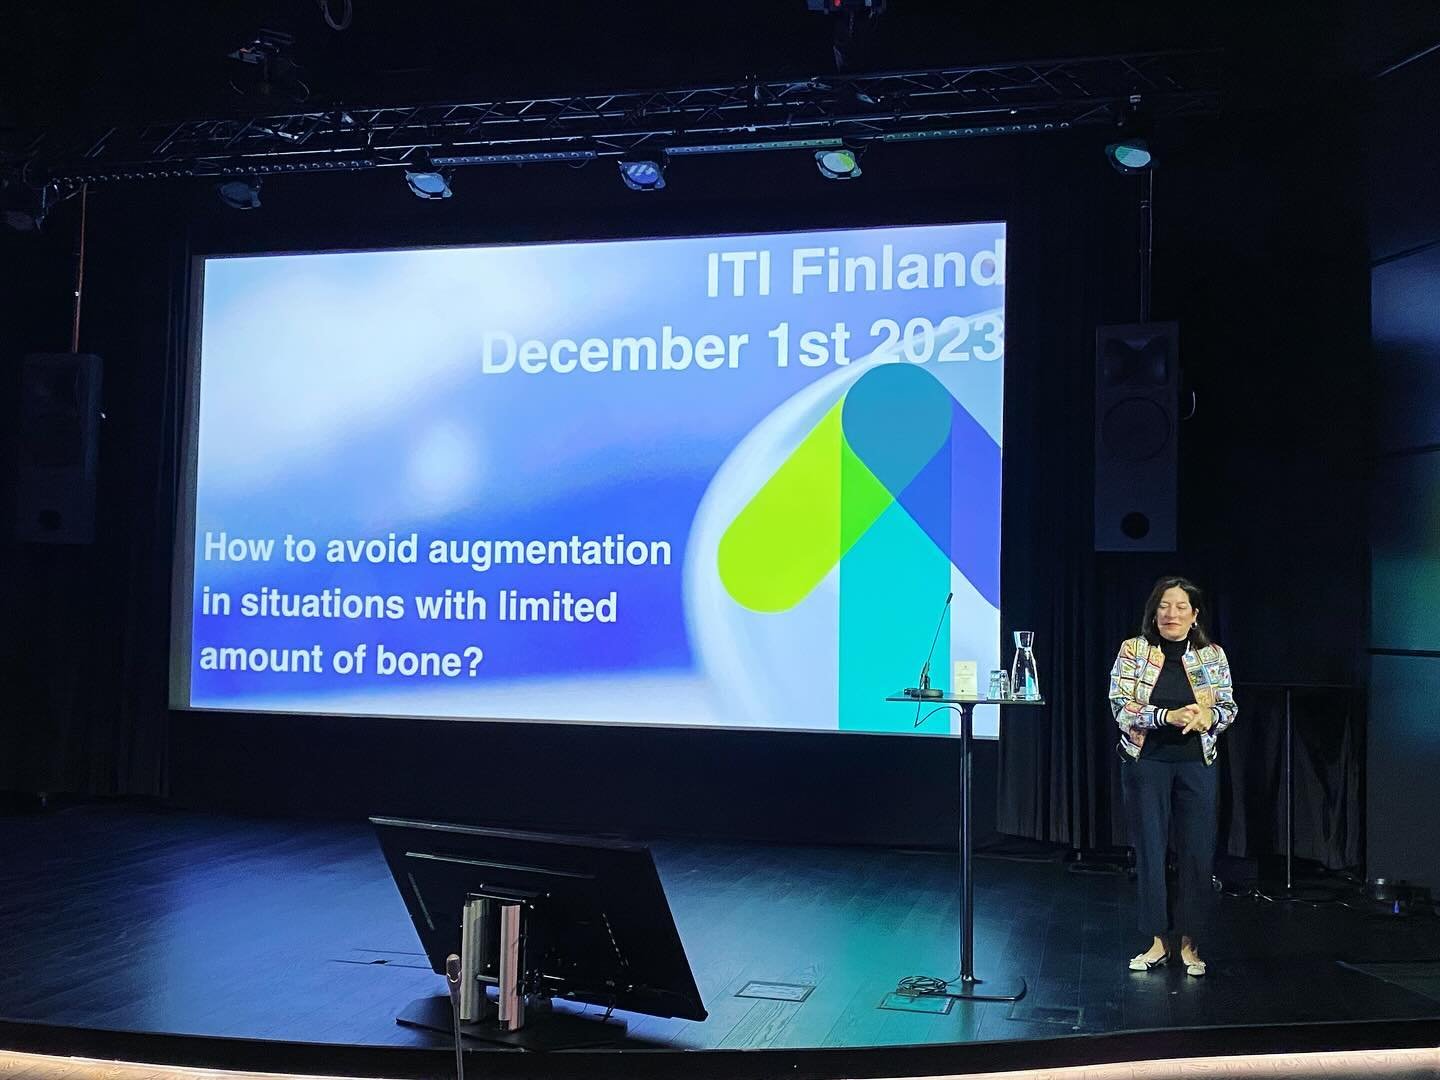 ITI Education day Finland 2023: 

Thank you PD Dr. Nadja Naenni nadja_naenni for your beautiful presentation. Carefully considering treatment alternatives is always so important, especially in challenging situations. Patient comes first. If and when 